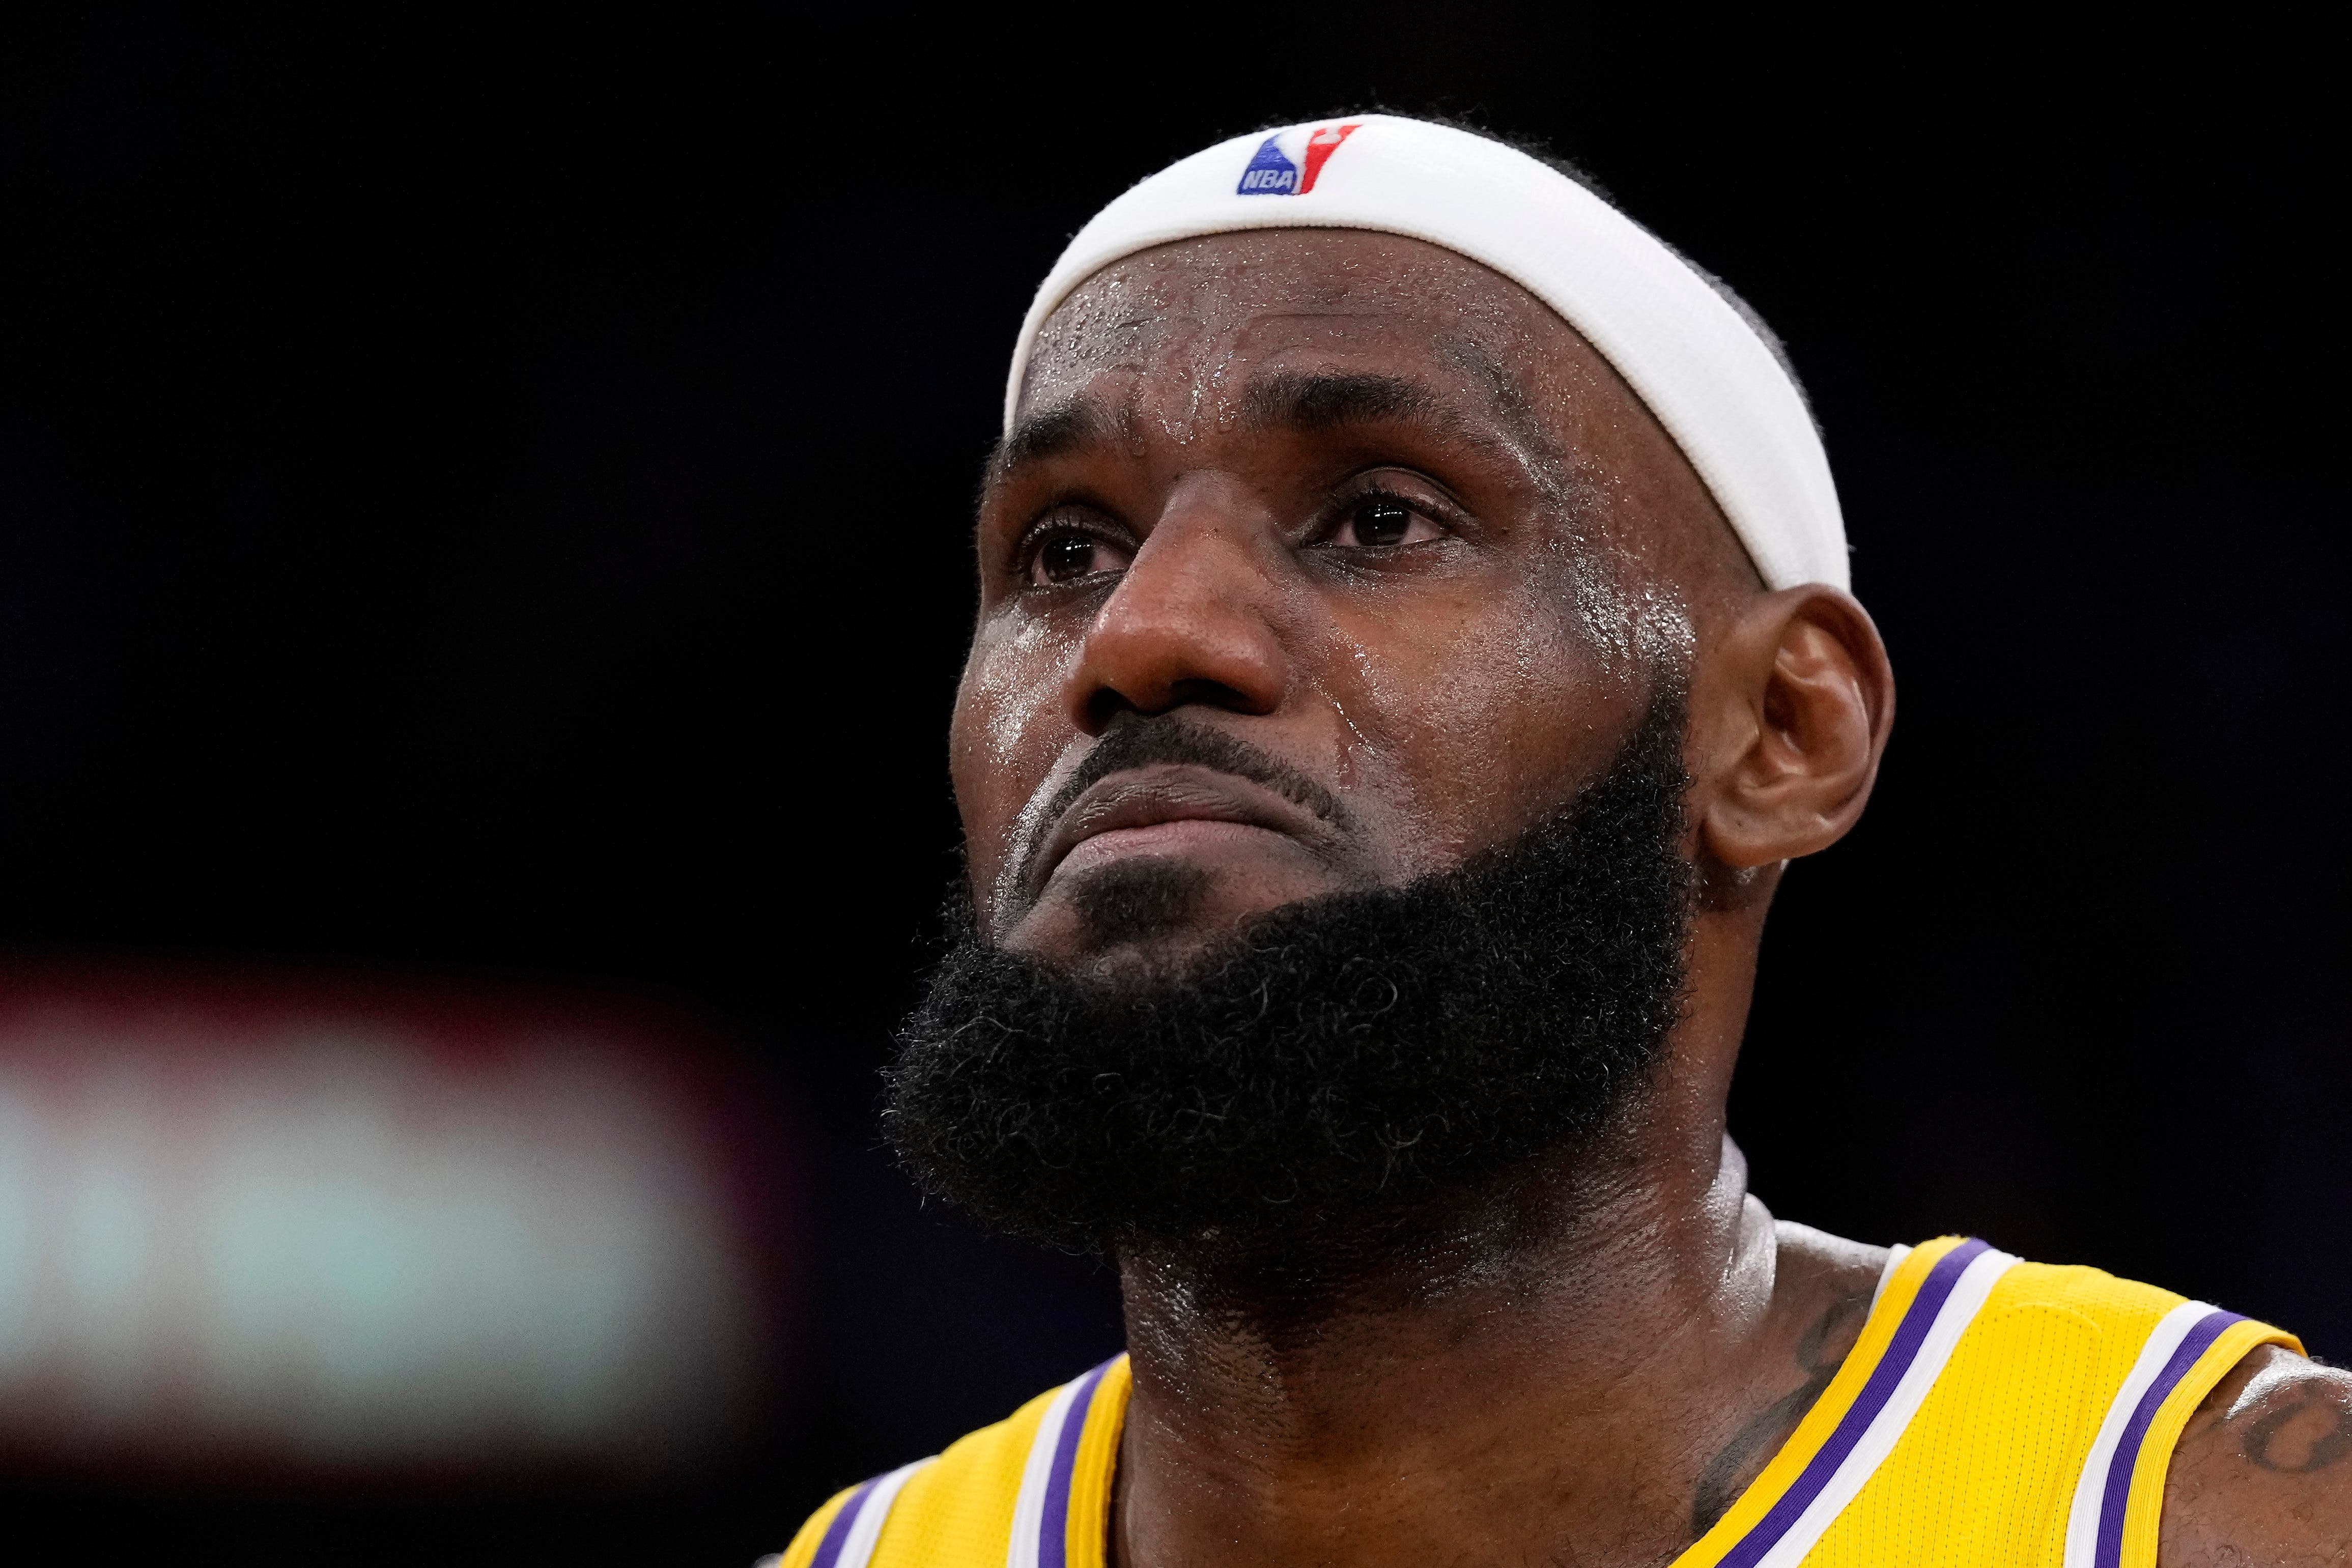 LeBron James: The statistics behind the career of NBA's all-time leading scorer | The Independent